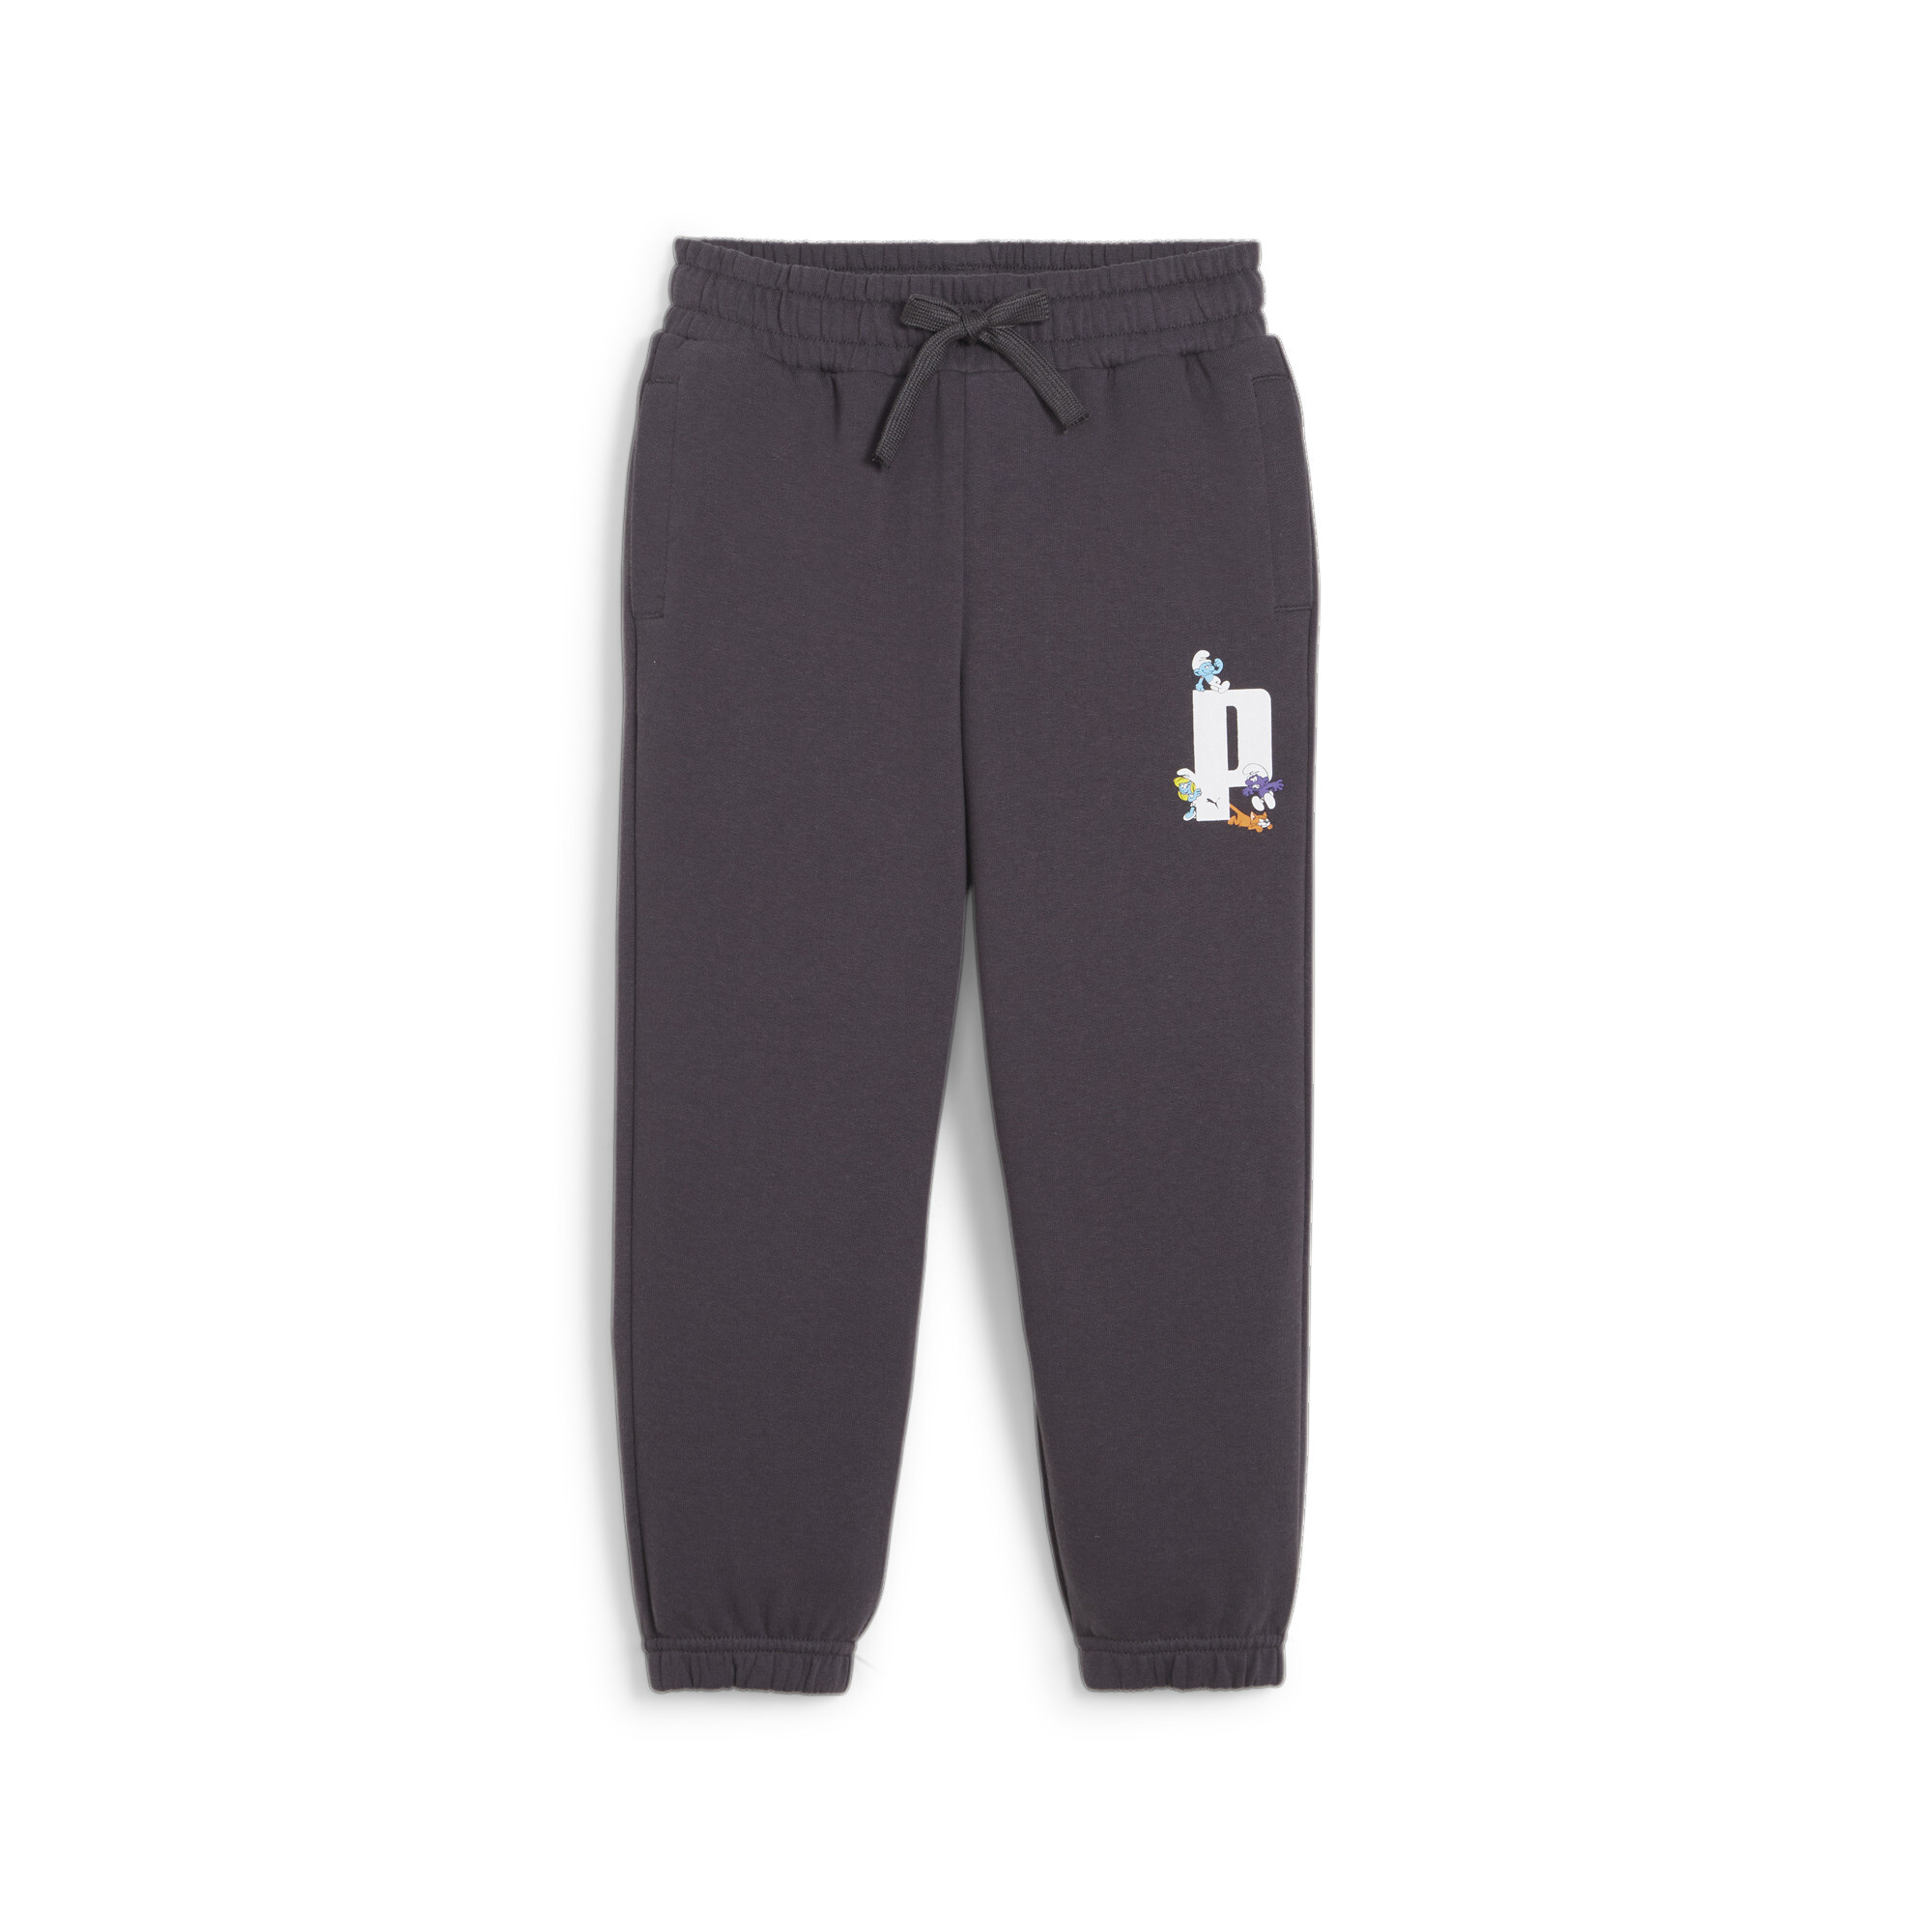 PUMA X THE SMURFS Sweatpants In Gray, Size 7-8 Youth